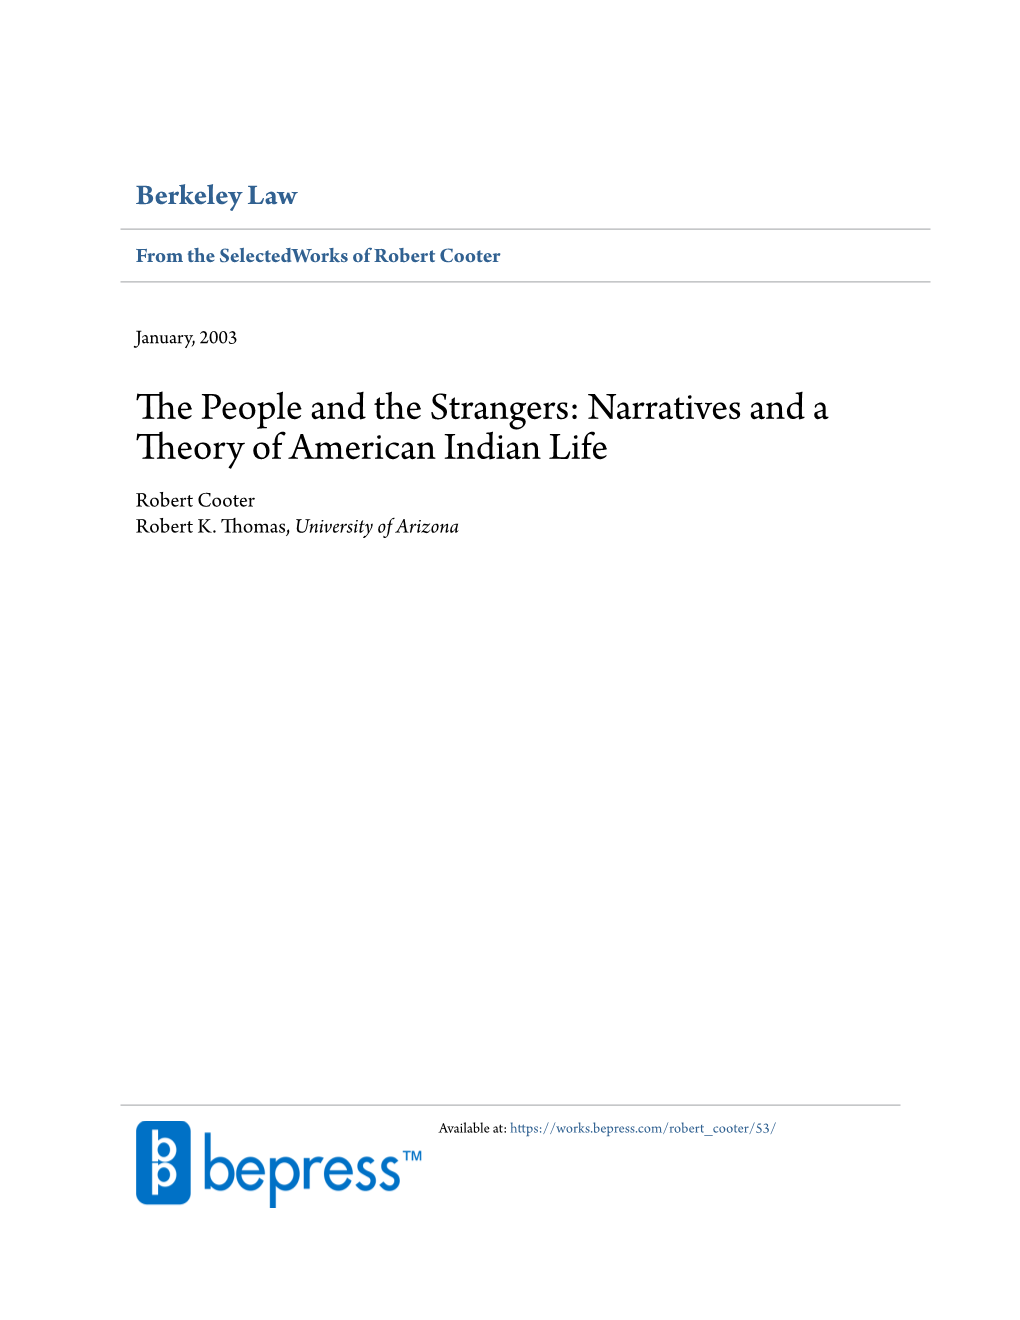 Narratives and a Theory of American Indian Life Robert Cooter Robert K